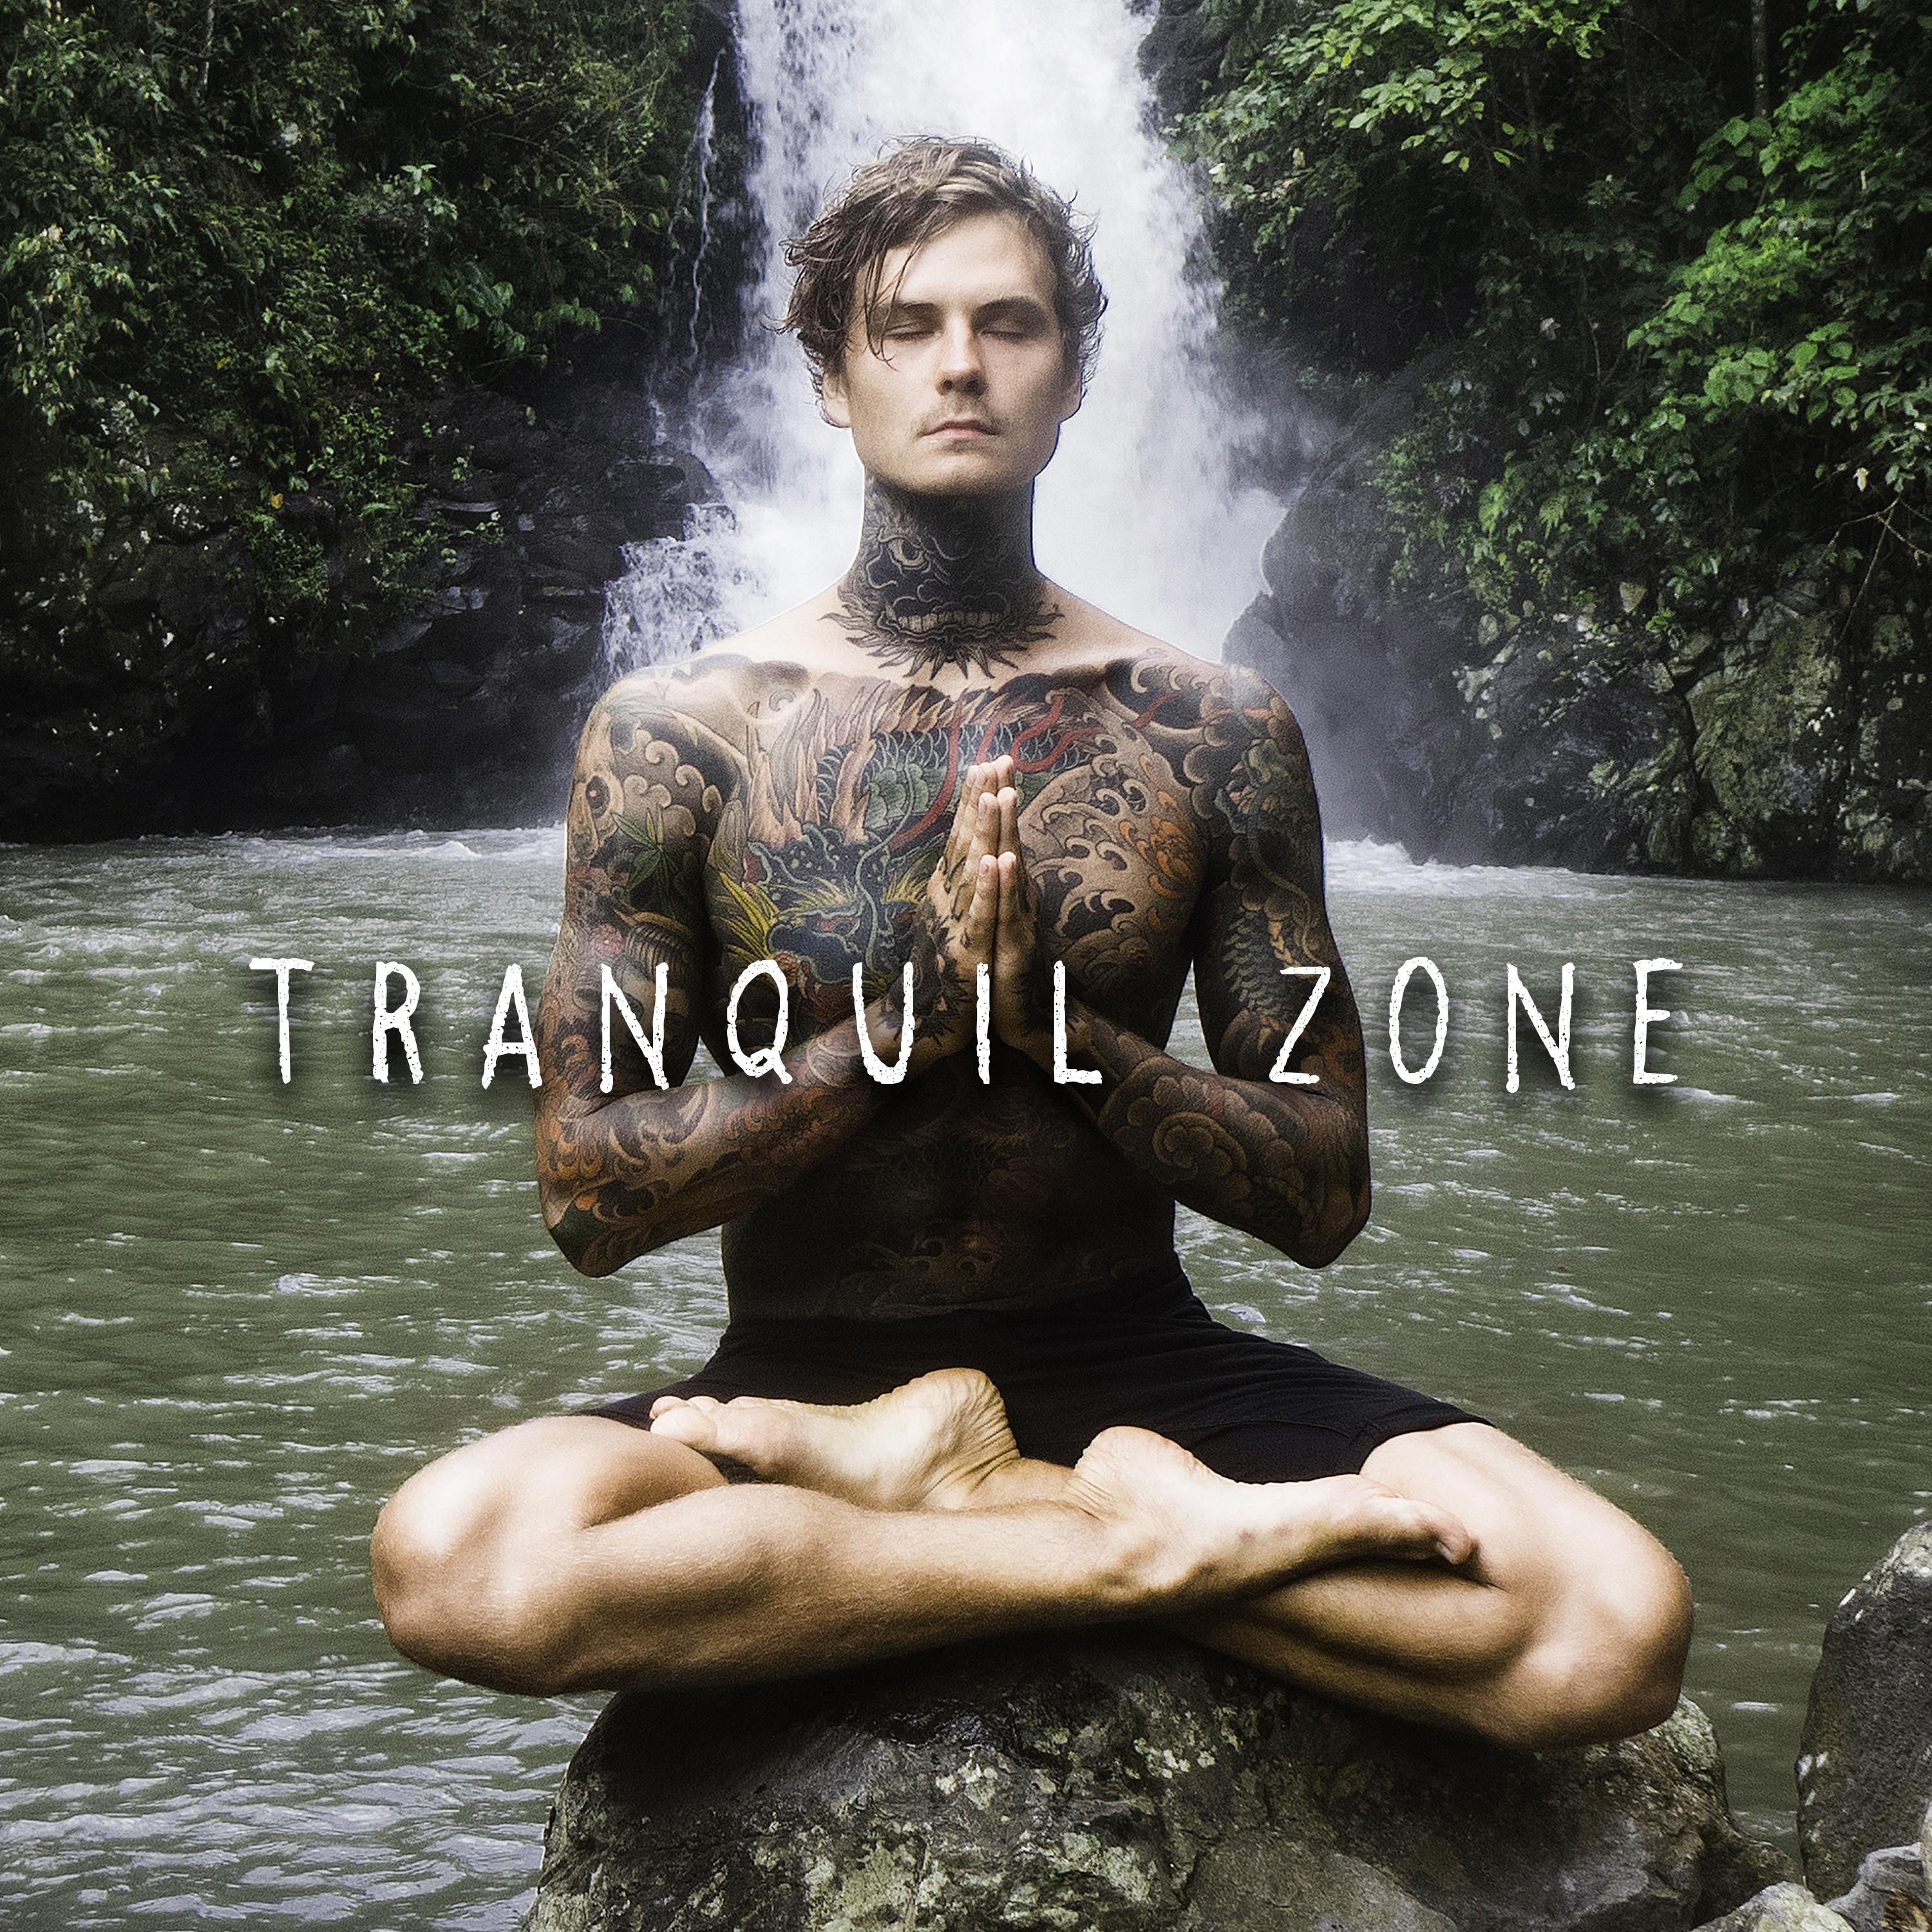 Tranquil Zone (Free Negative, Happiness, Body & Mind Balance, Total Reboot)